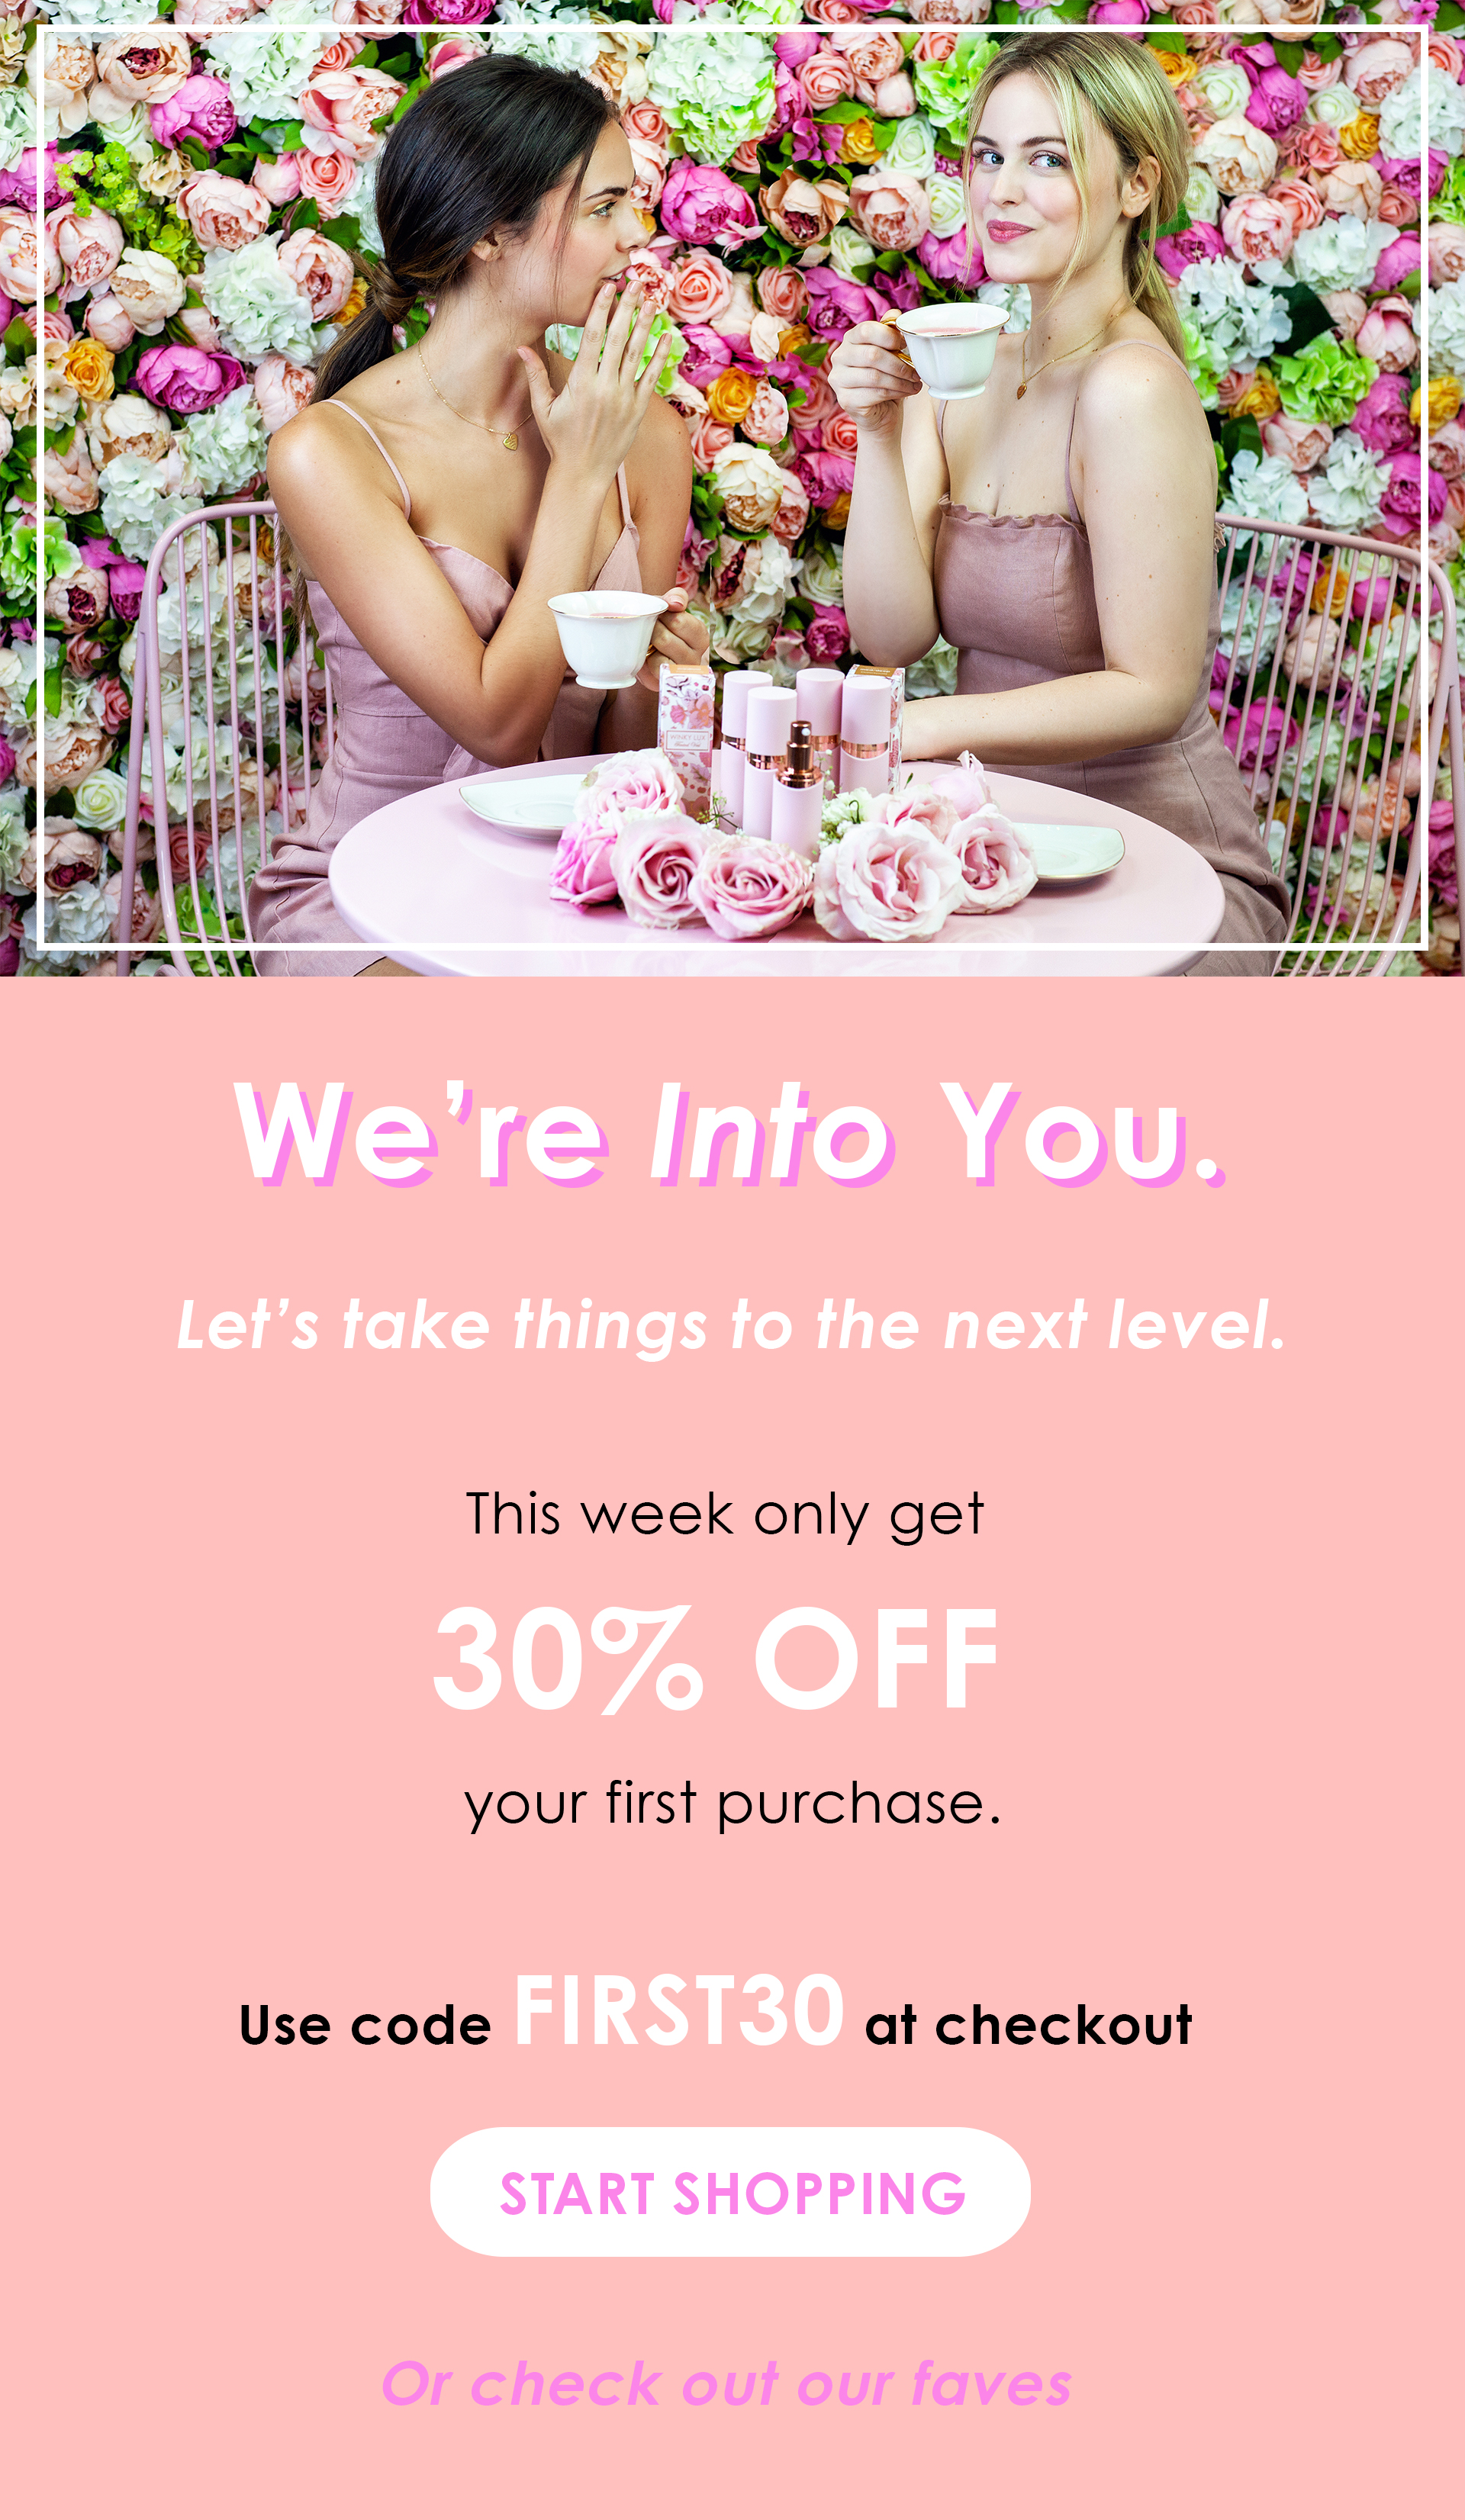 Get 30% Off Your First Purchase With Code FIRST30!